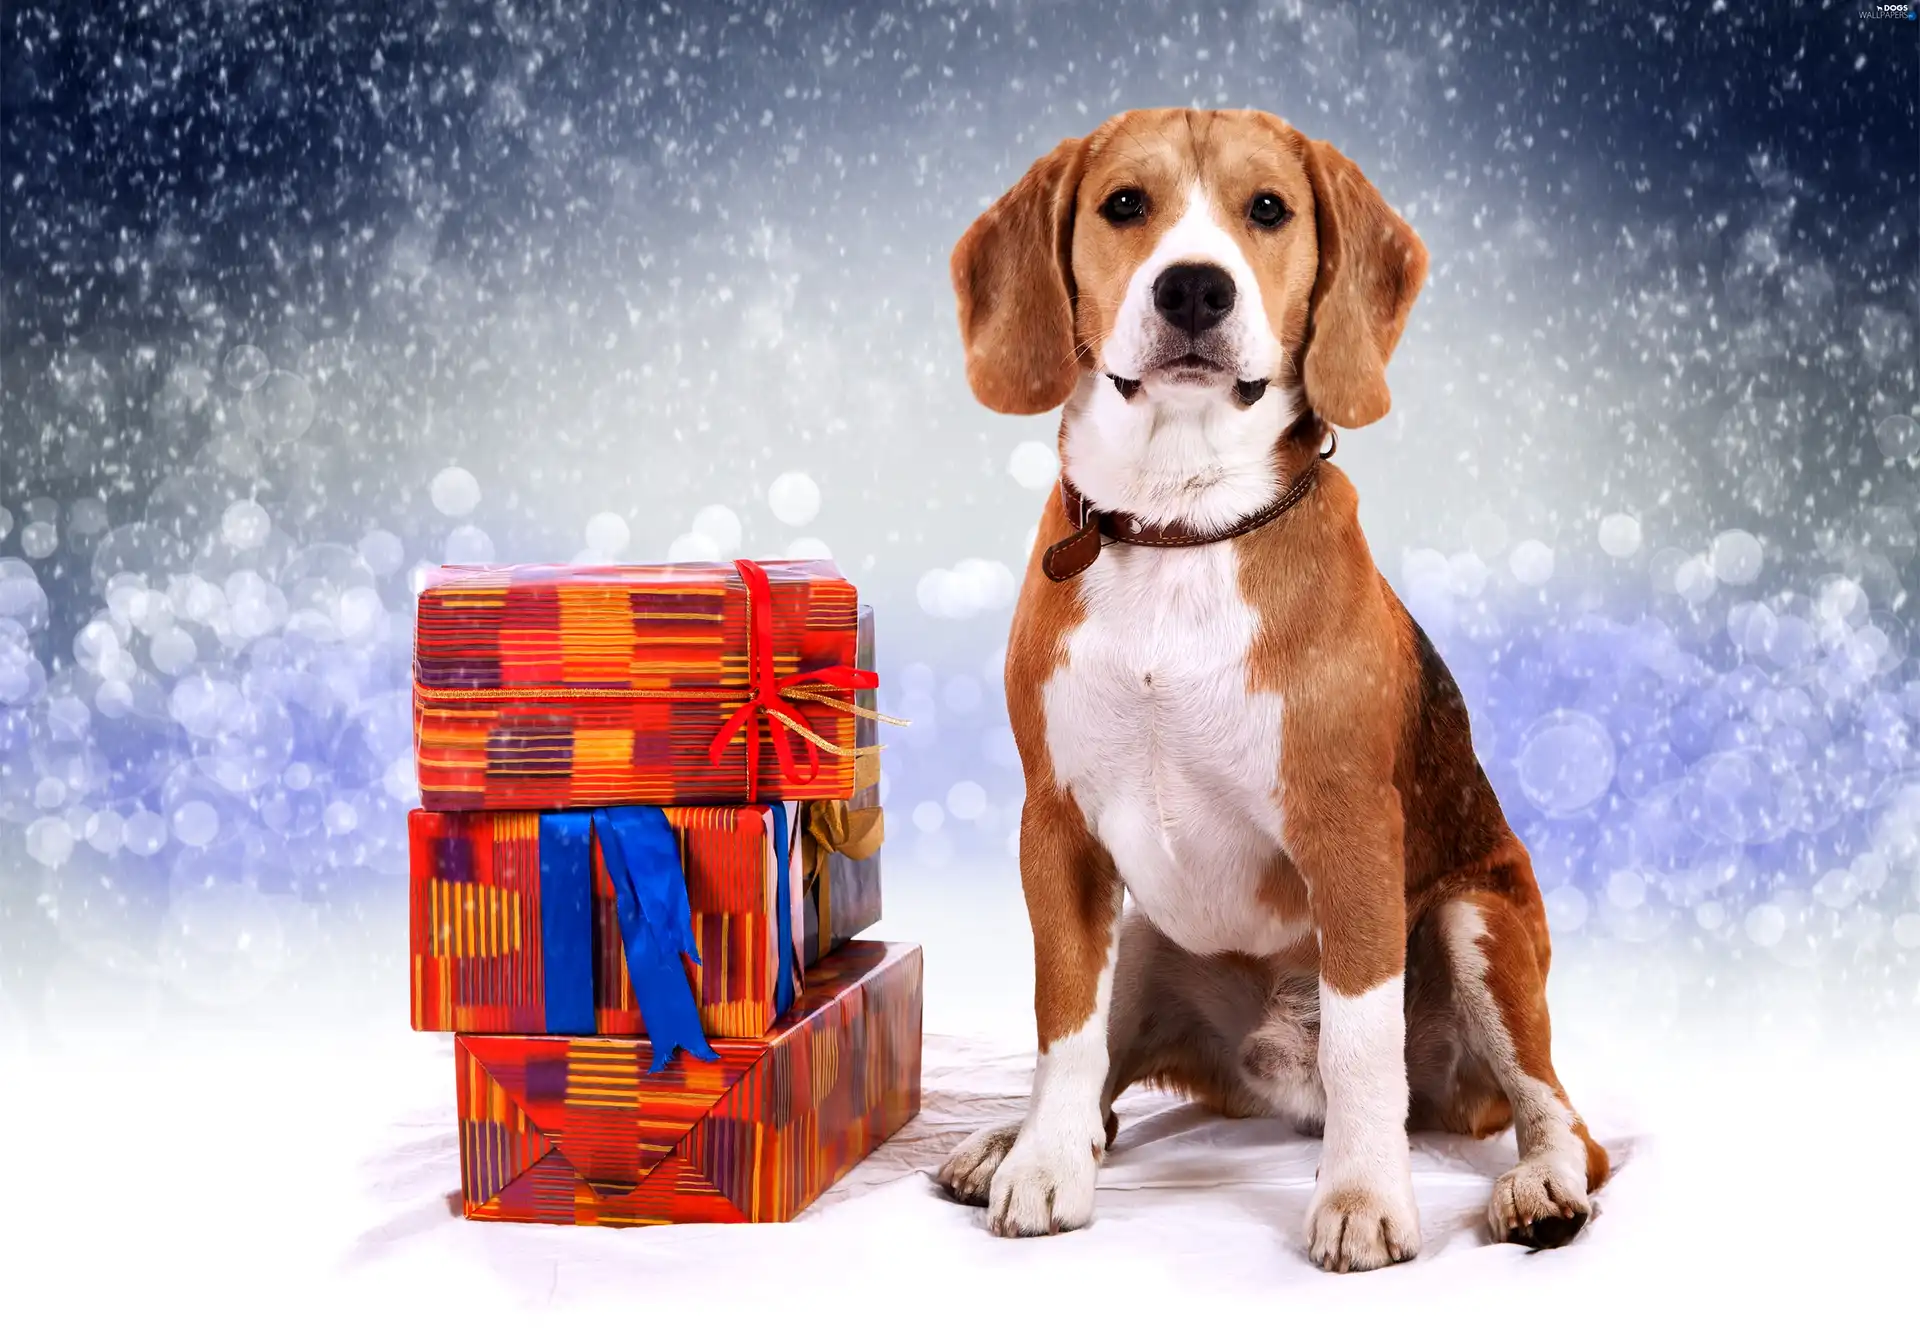 snow, incident, Beagle, gifts